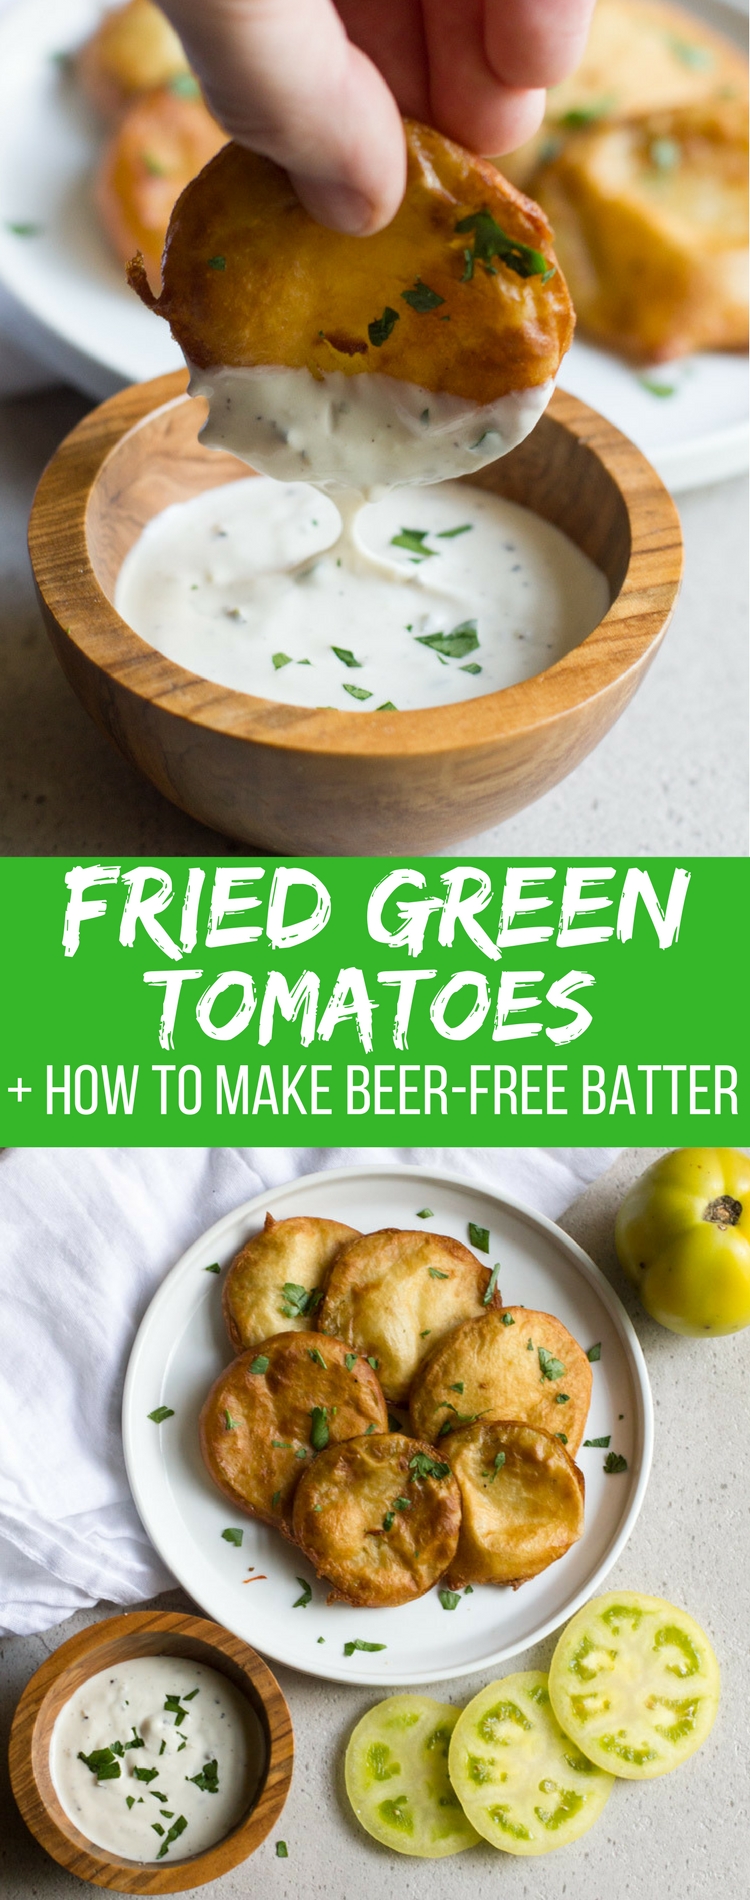 Fried green tomatoes are made super quick and easy with this beer-free batter!